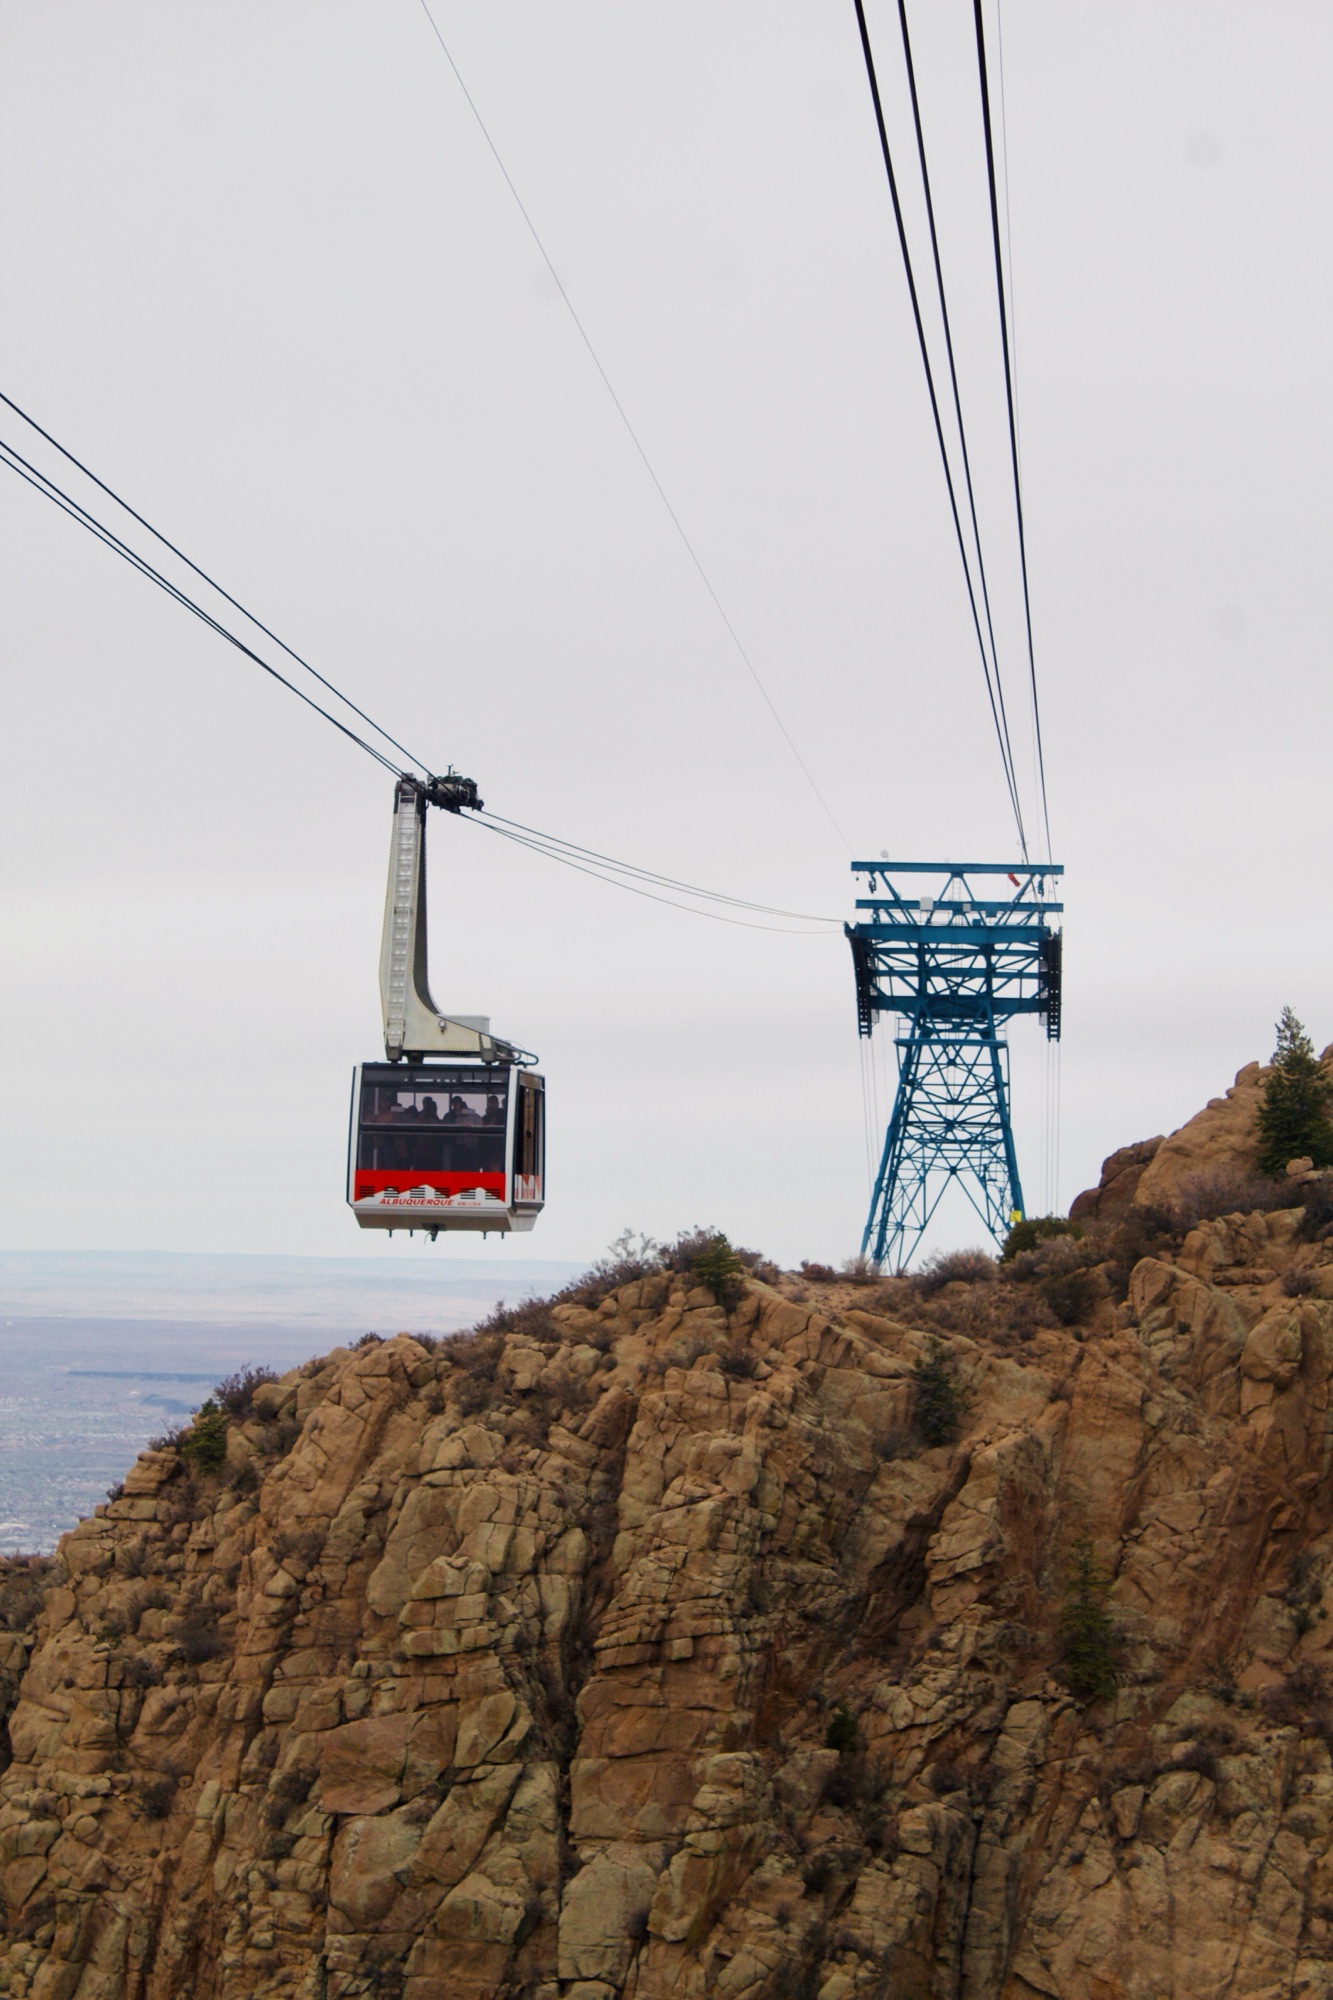 5 Tips for visiting the Sandia Peak Tramway